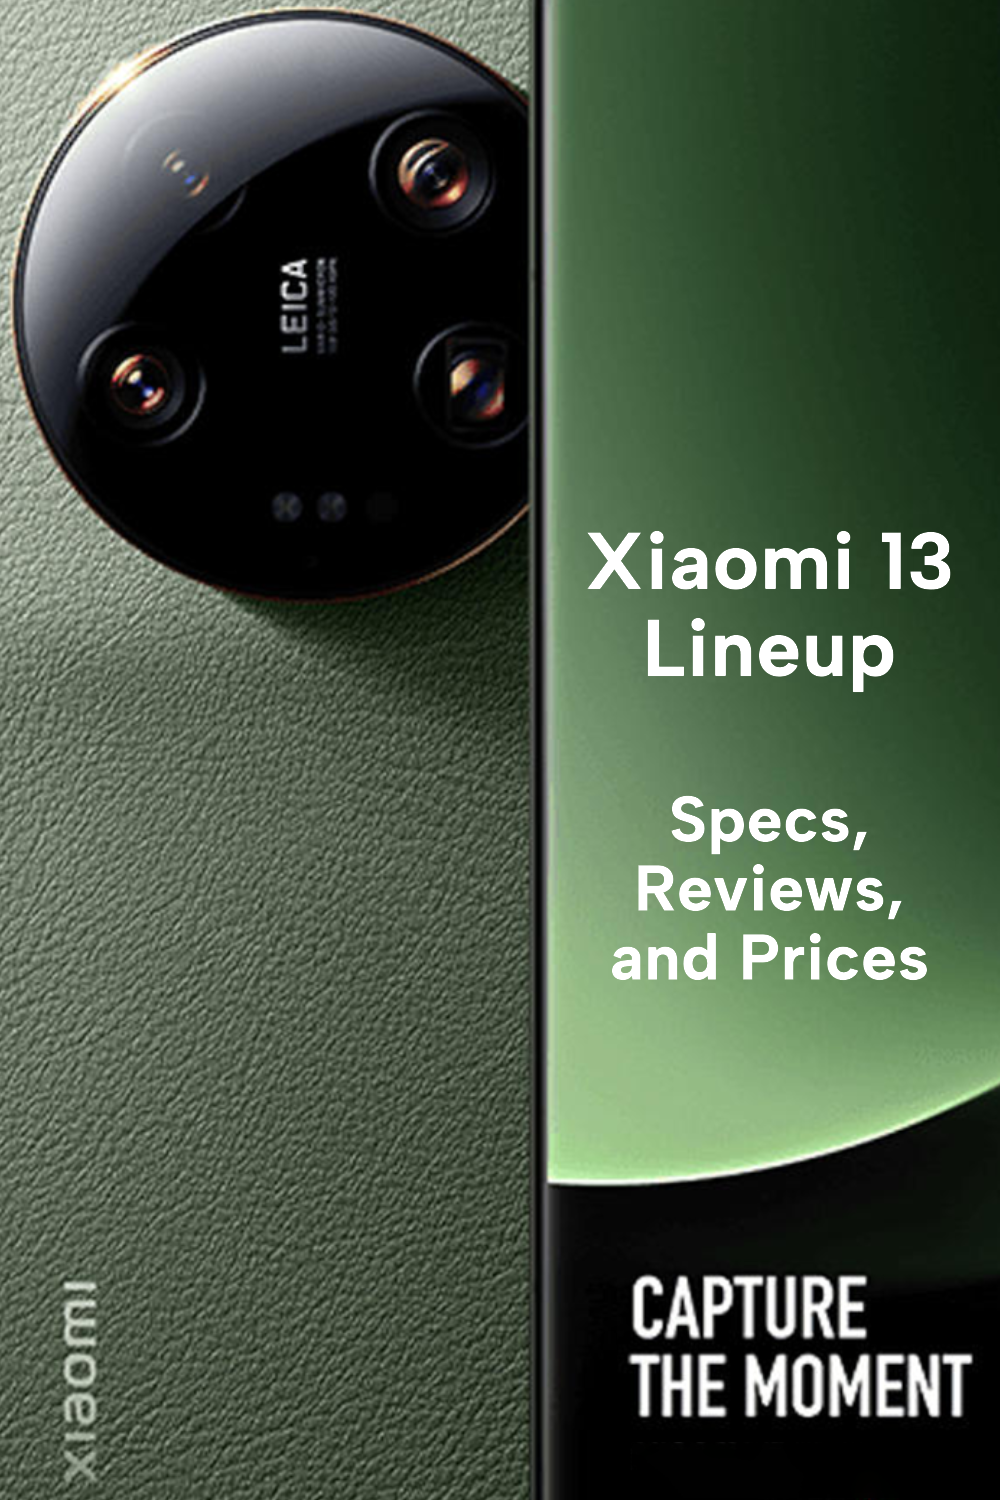 Xiaomi 13 lineup: specs, reviews and prices